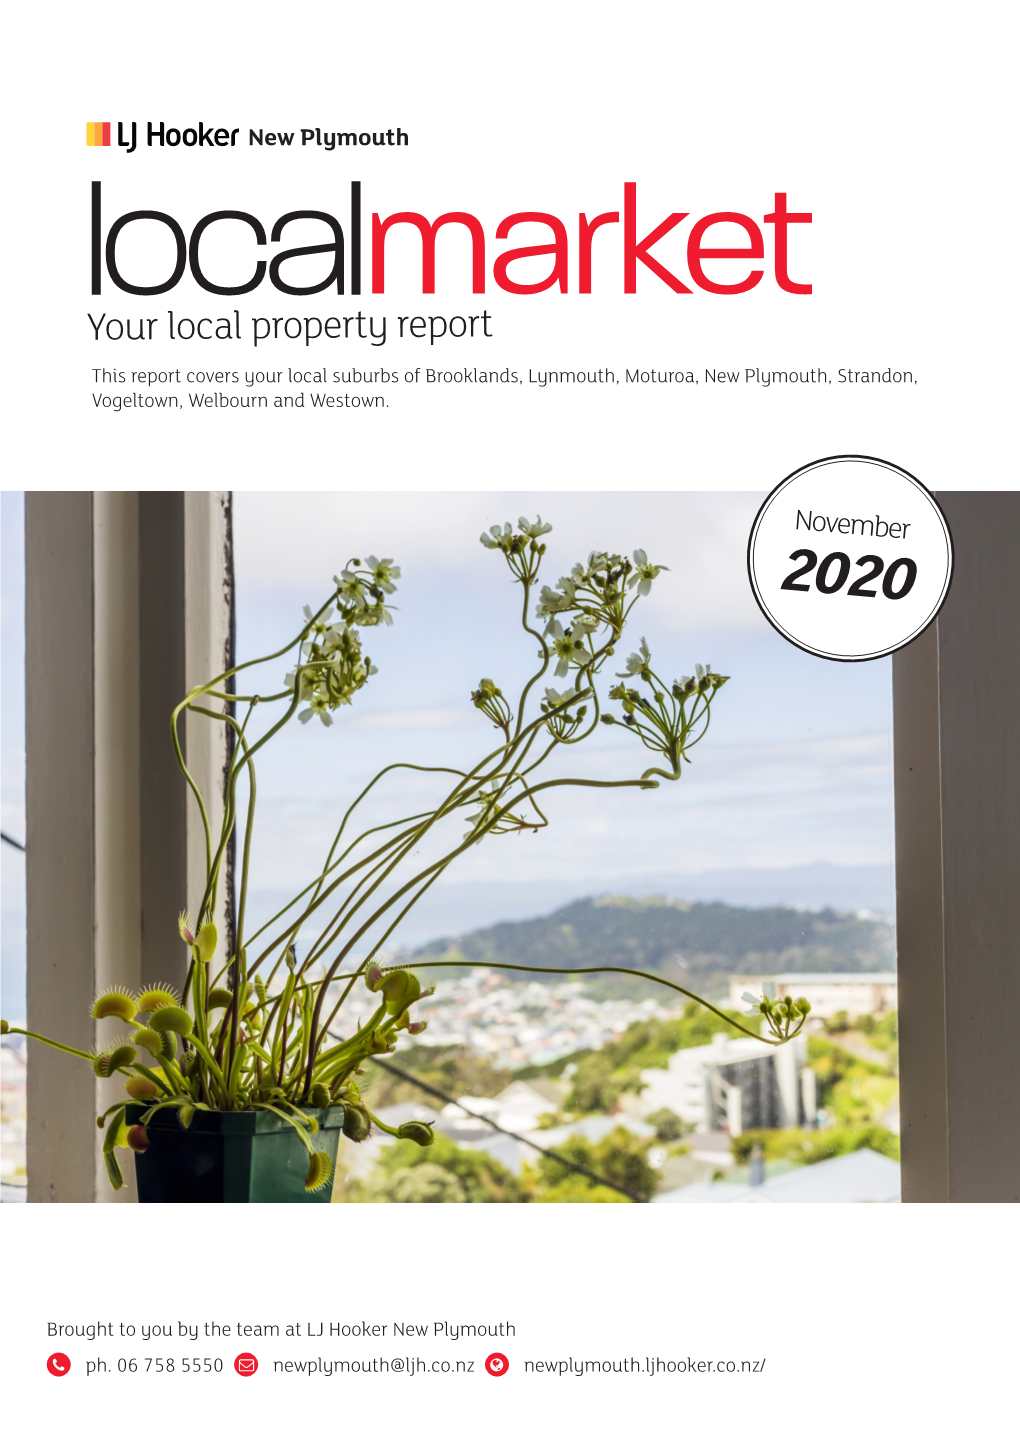 Your Local Property Report This Report Covers Your Local Suburbs of Brooklands, Lynmouth, Moturoa, New Plymouth, Strandon, Vogeltown, Welbourn and Westown